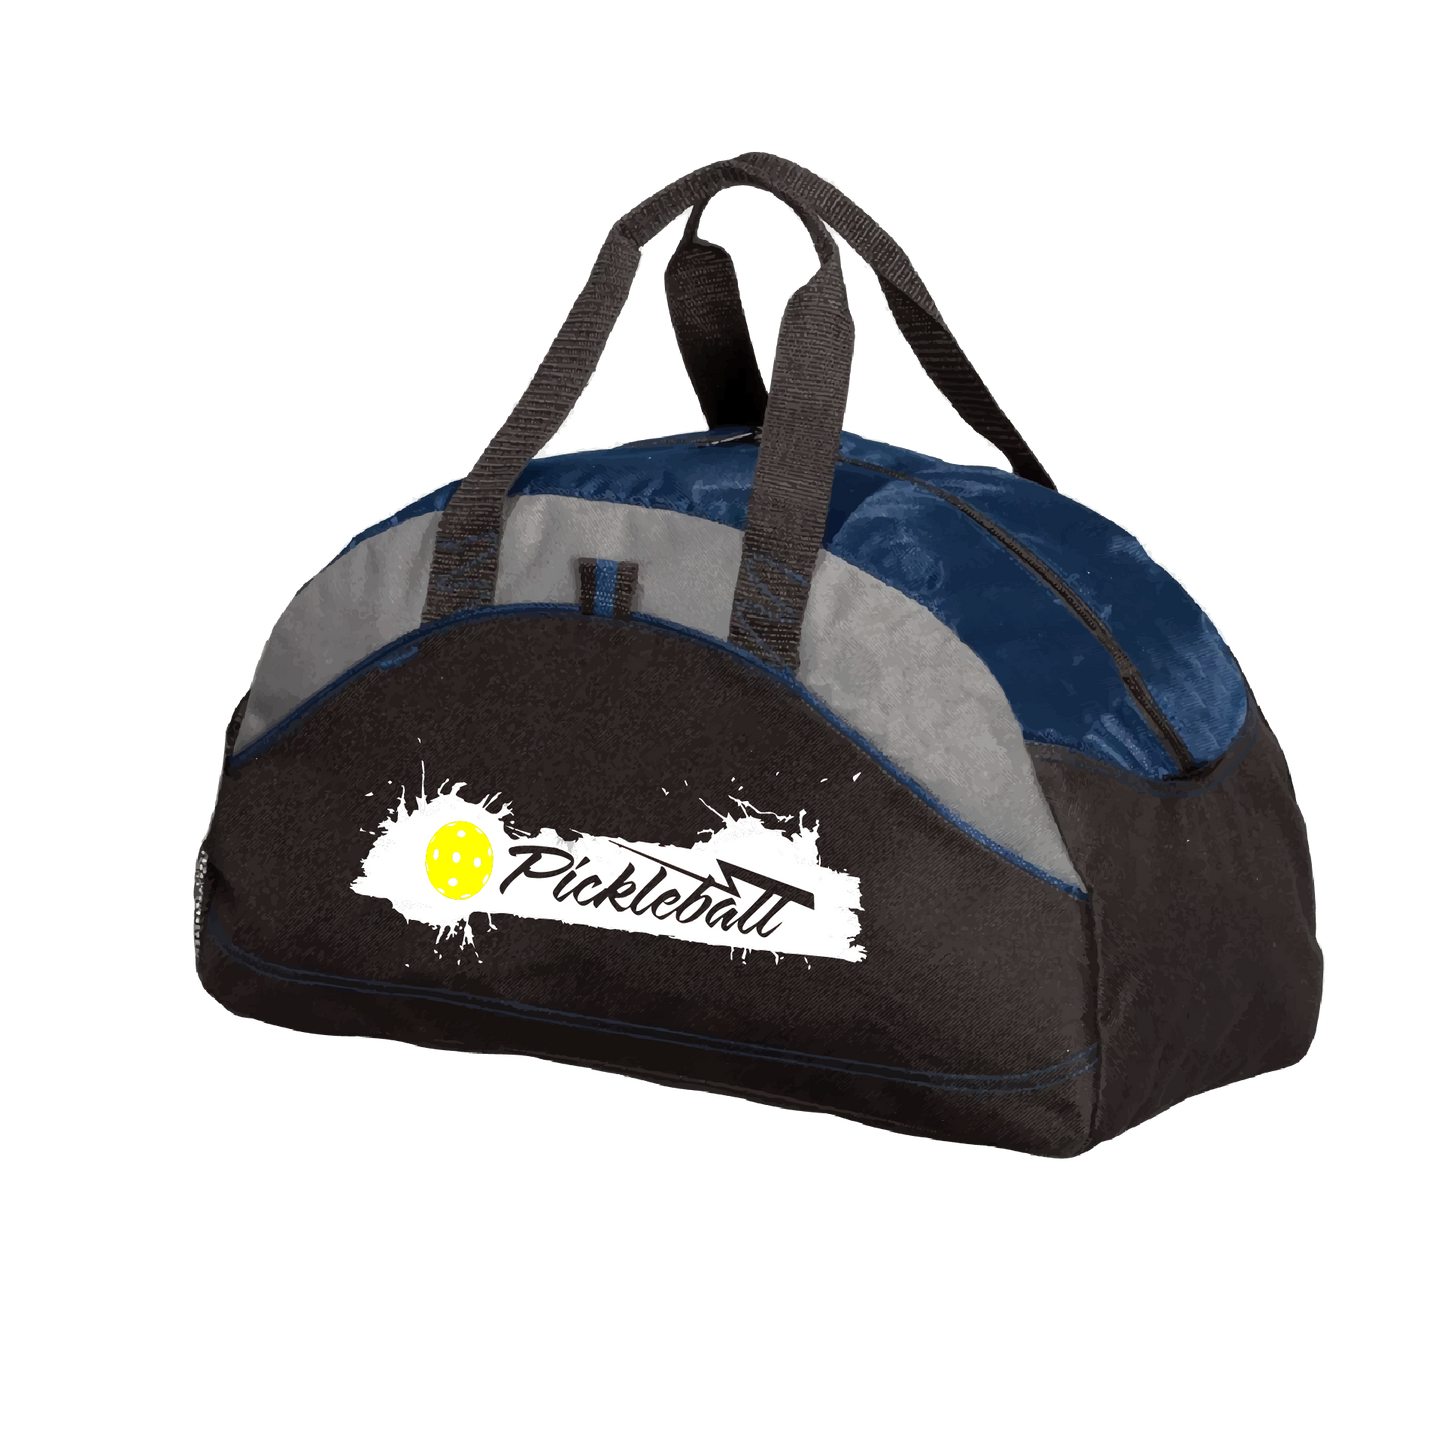 Pickleball Design: Extreme  Carry your gear in comfort and style. This fun pickleball duffel bag is the perfect accessory for all pickleball players needing to keep their gear in one place. This medium sized duffel tote is ideal for all your pickleball activities. The large center compartment allows for plenty of space and the mesh end pocket is perfect for holding a water bottle. Duffel bag comes with an adjustable shoulder strap and the polyester material is durable and easily cleaned.